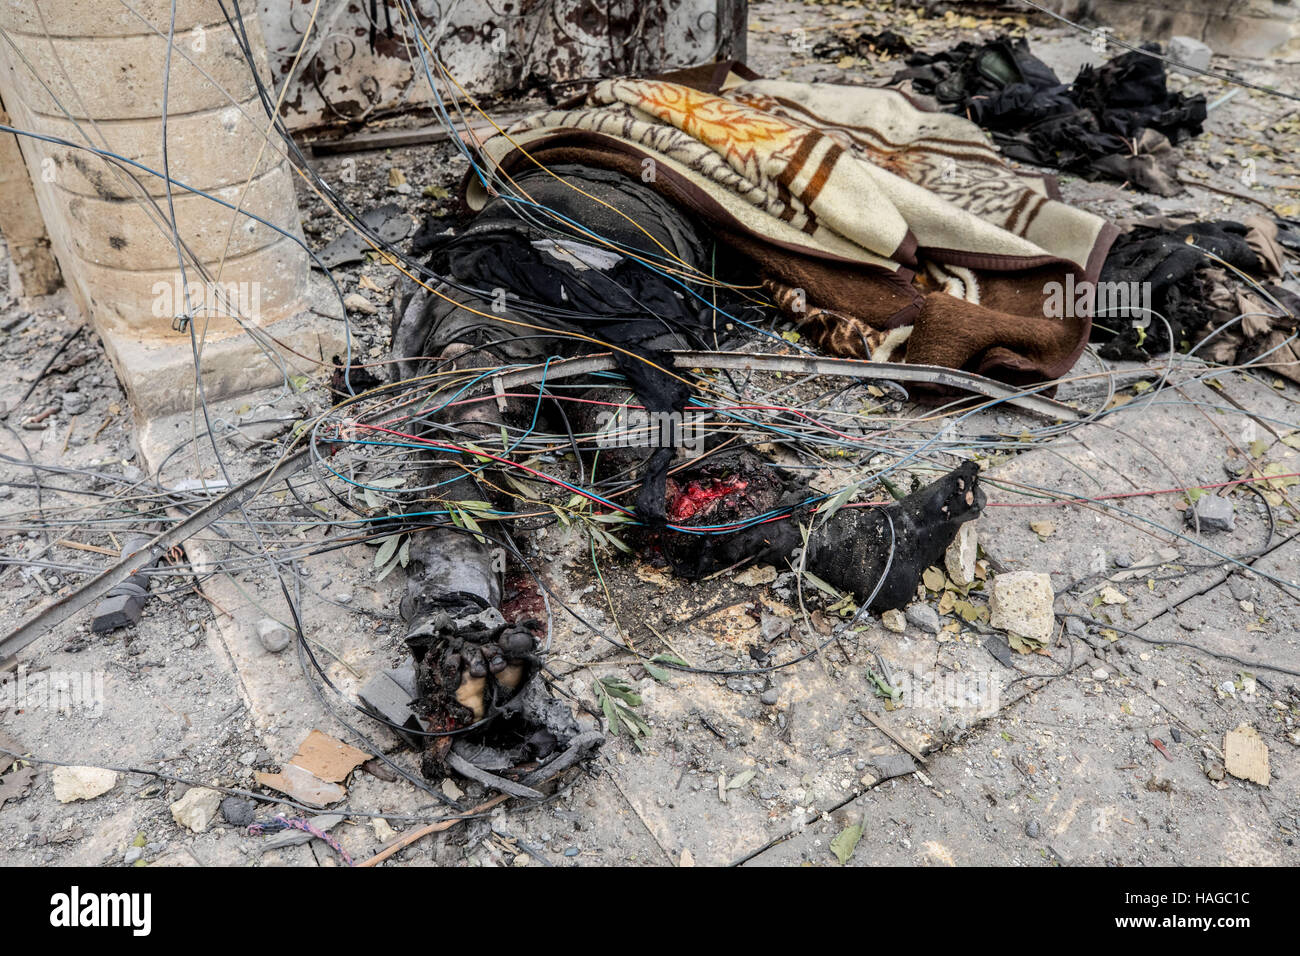 Mosul, Ninewa Province, Iraq. 30th Nov, 2016. The body of a dead ISIS fighter who blew himself up while trying to attack Iraqi forces. Credit:  Gabriel Romero/ZUMA Wire/Alamy Live News Stock Photo